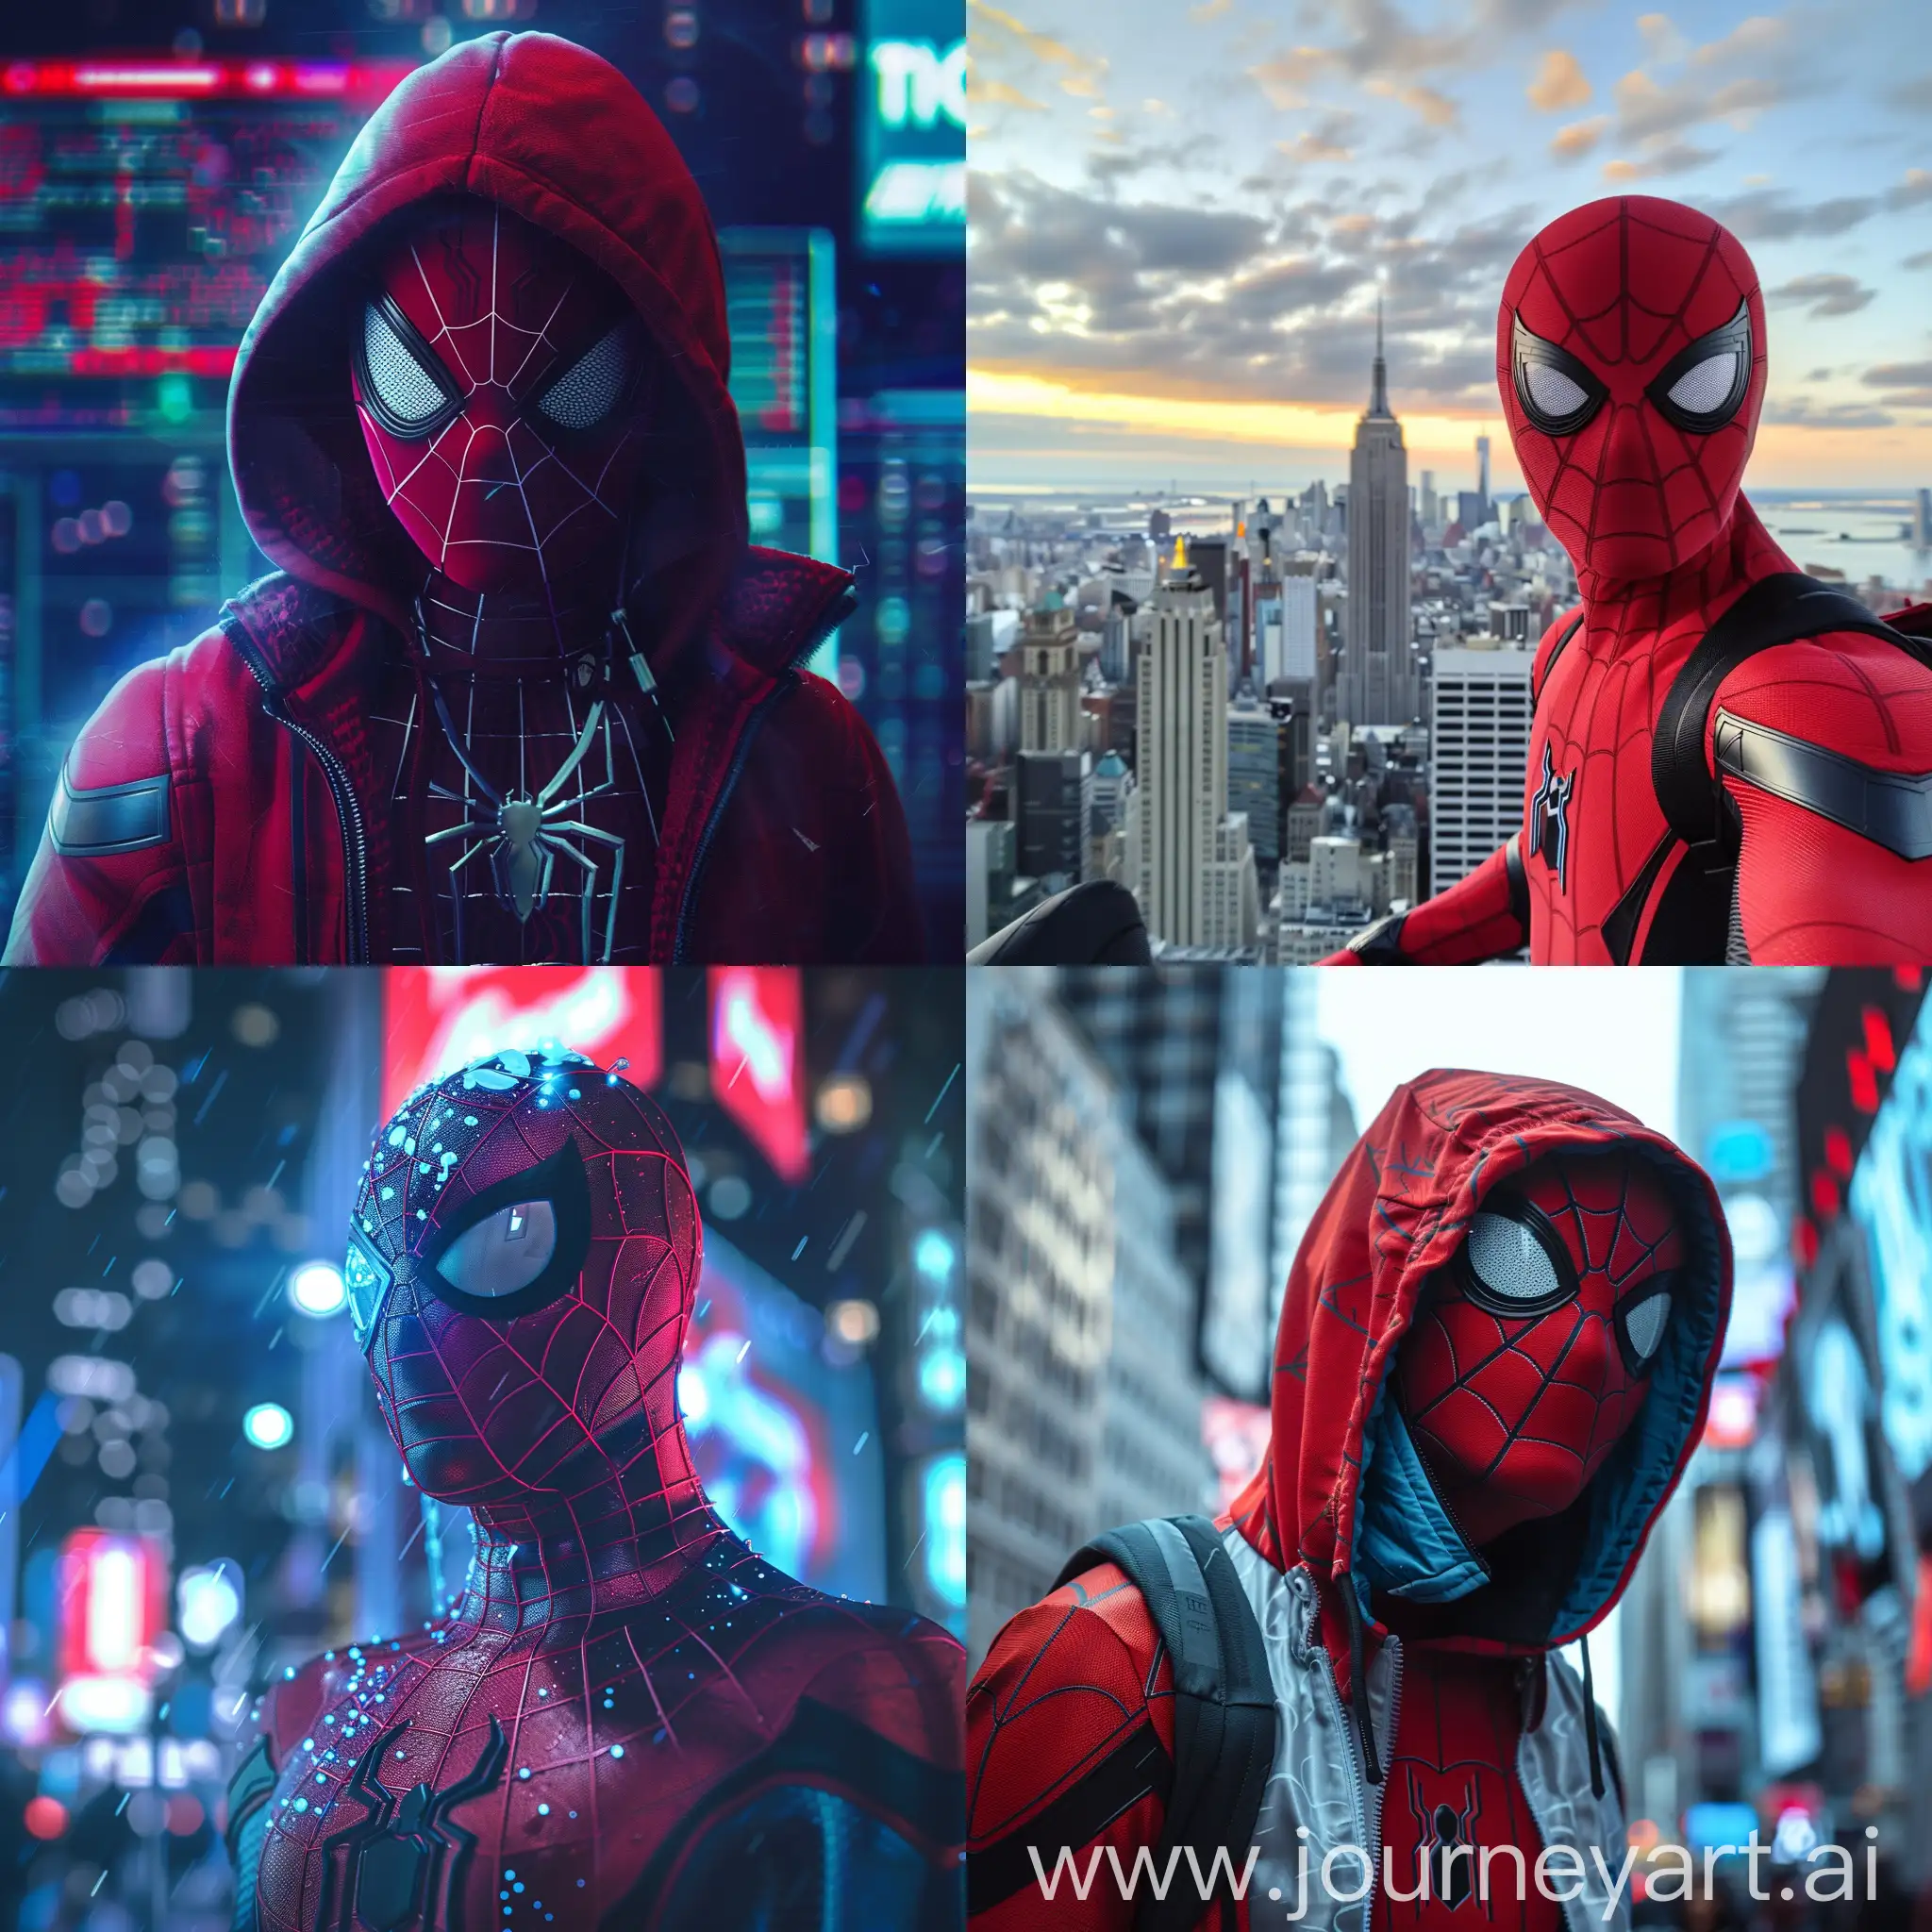 Spider-man software engineer profile picture in the gir of the default profile picture on tiktok